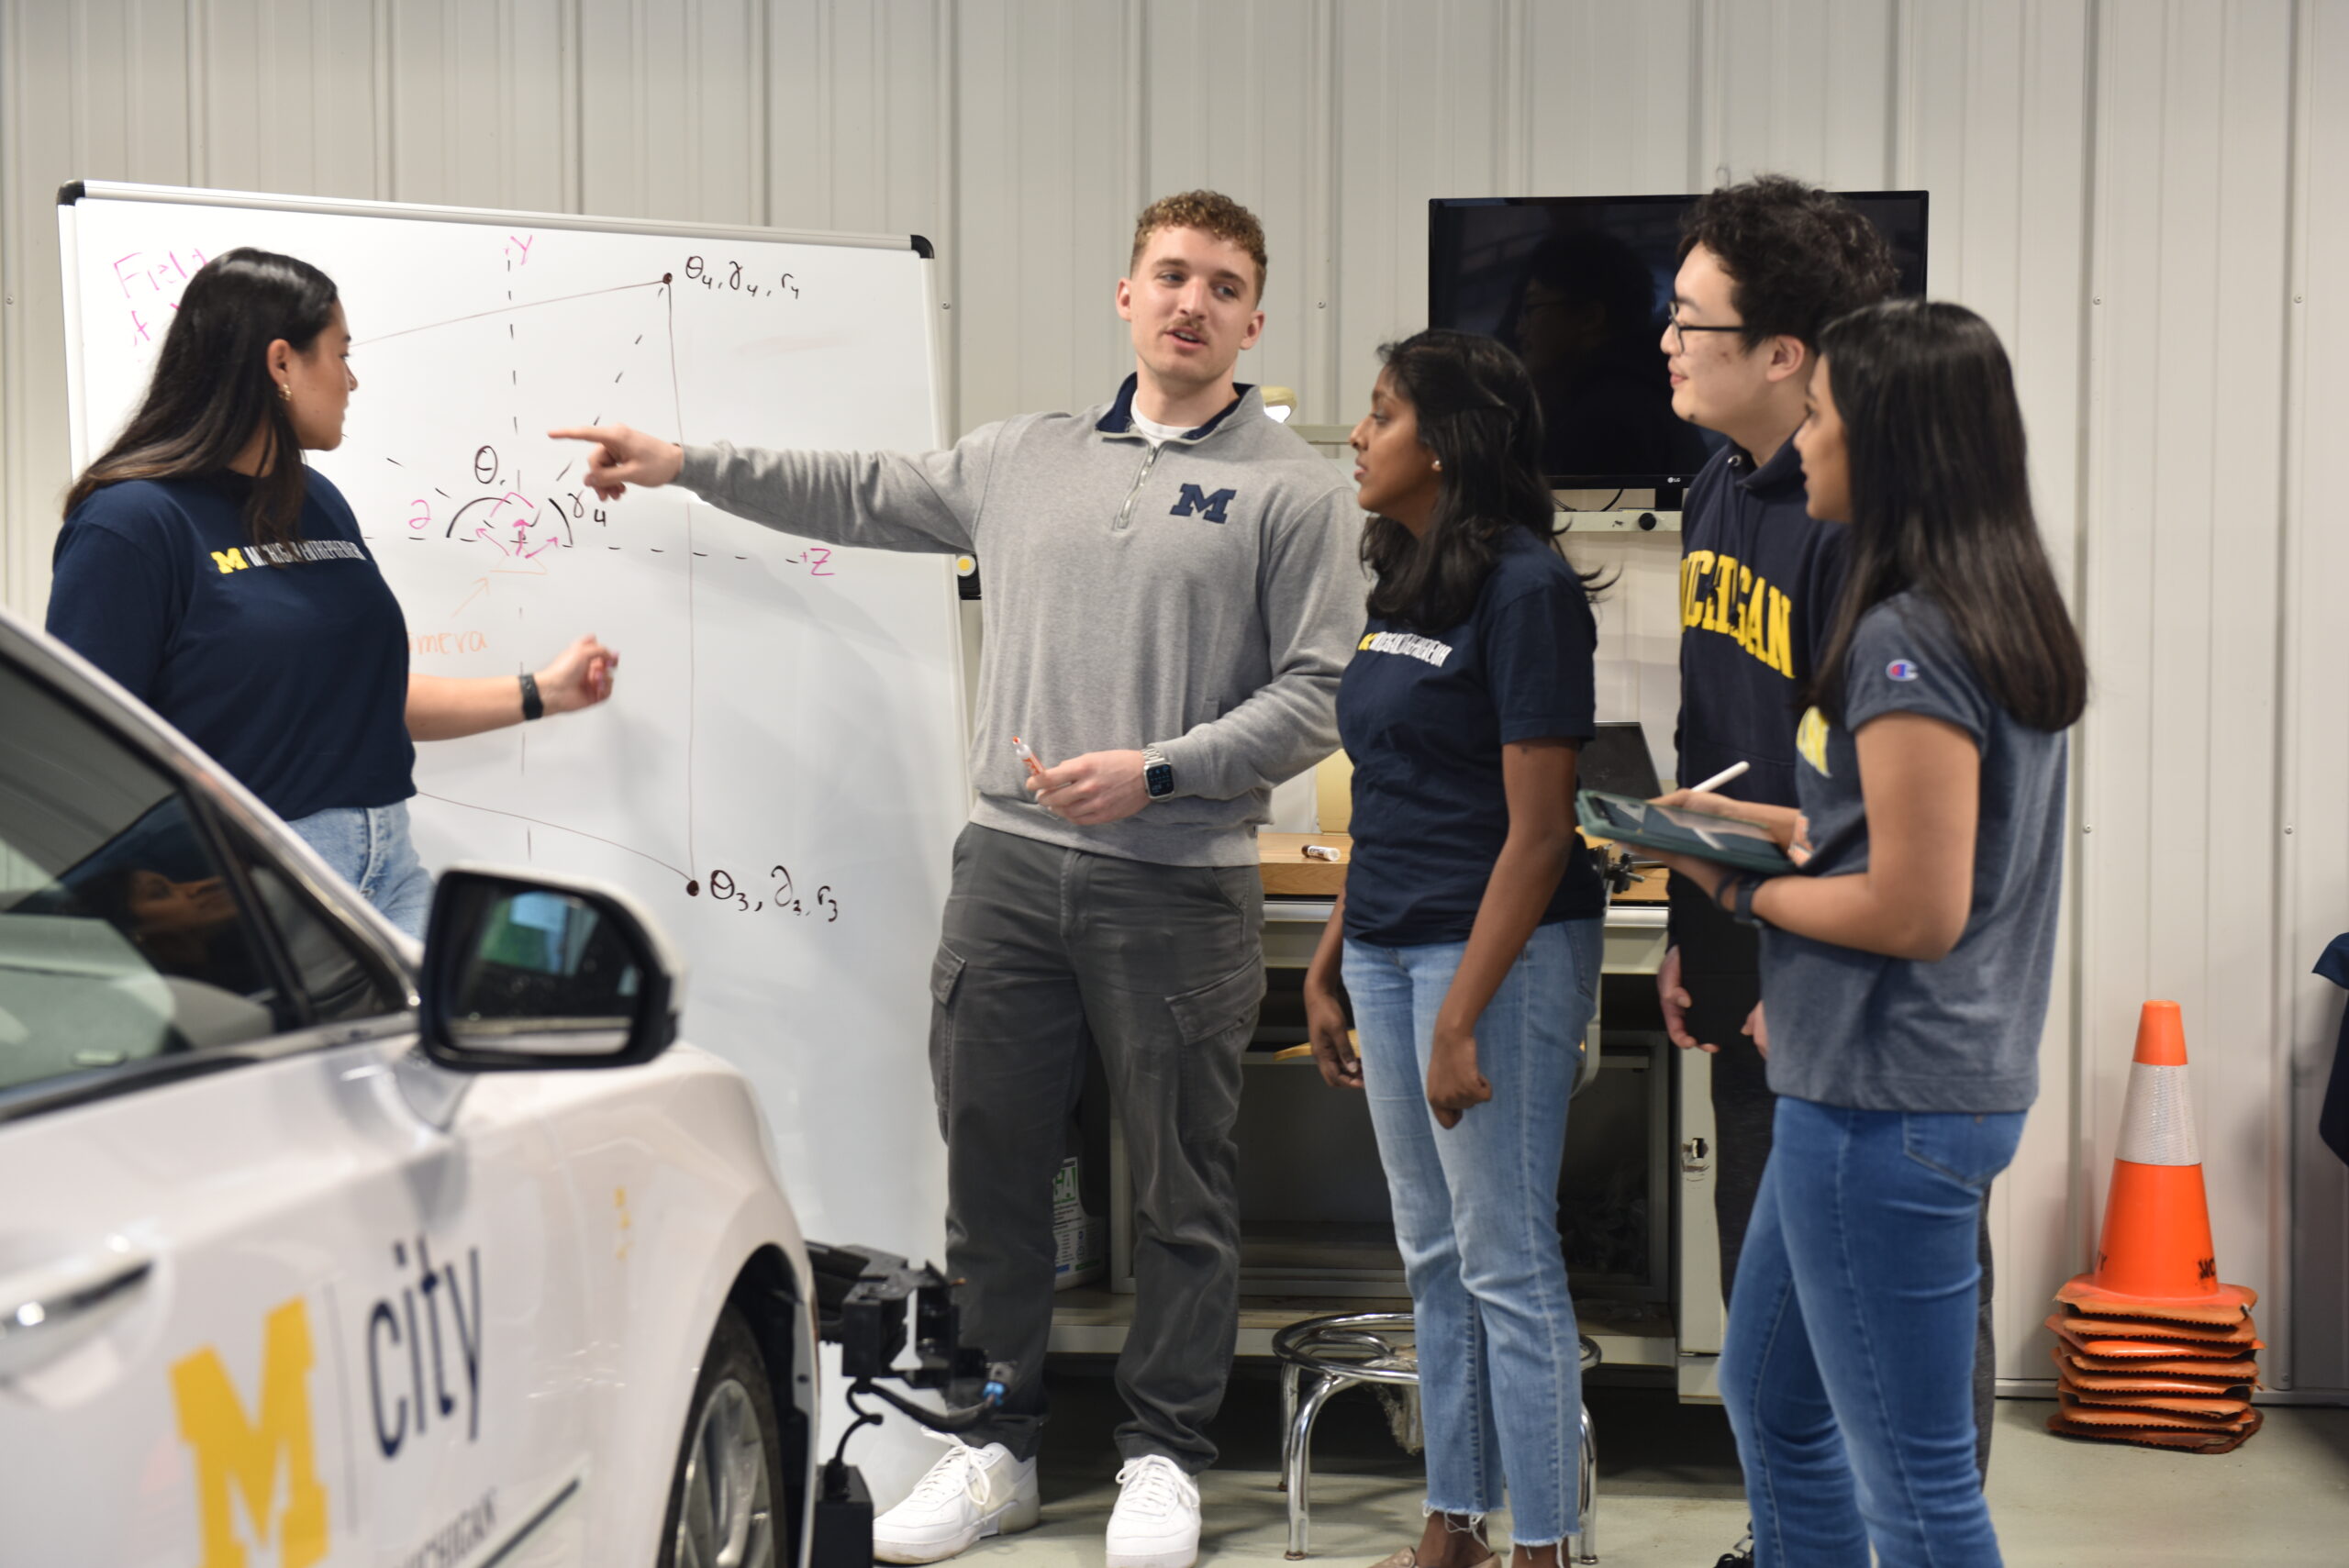 TechLab students work at a whiteboard next to an autonomous vehicle